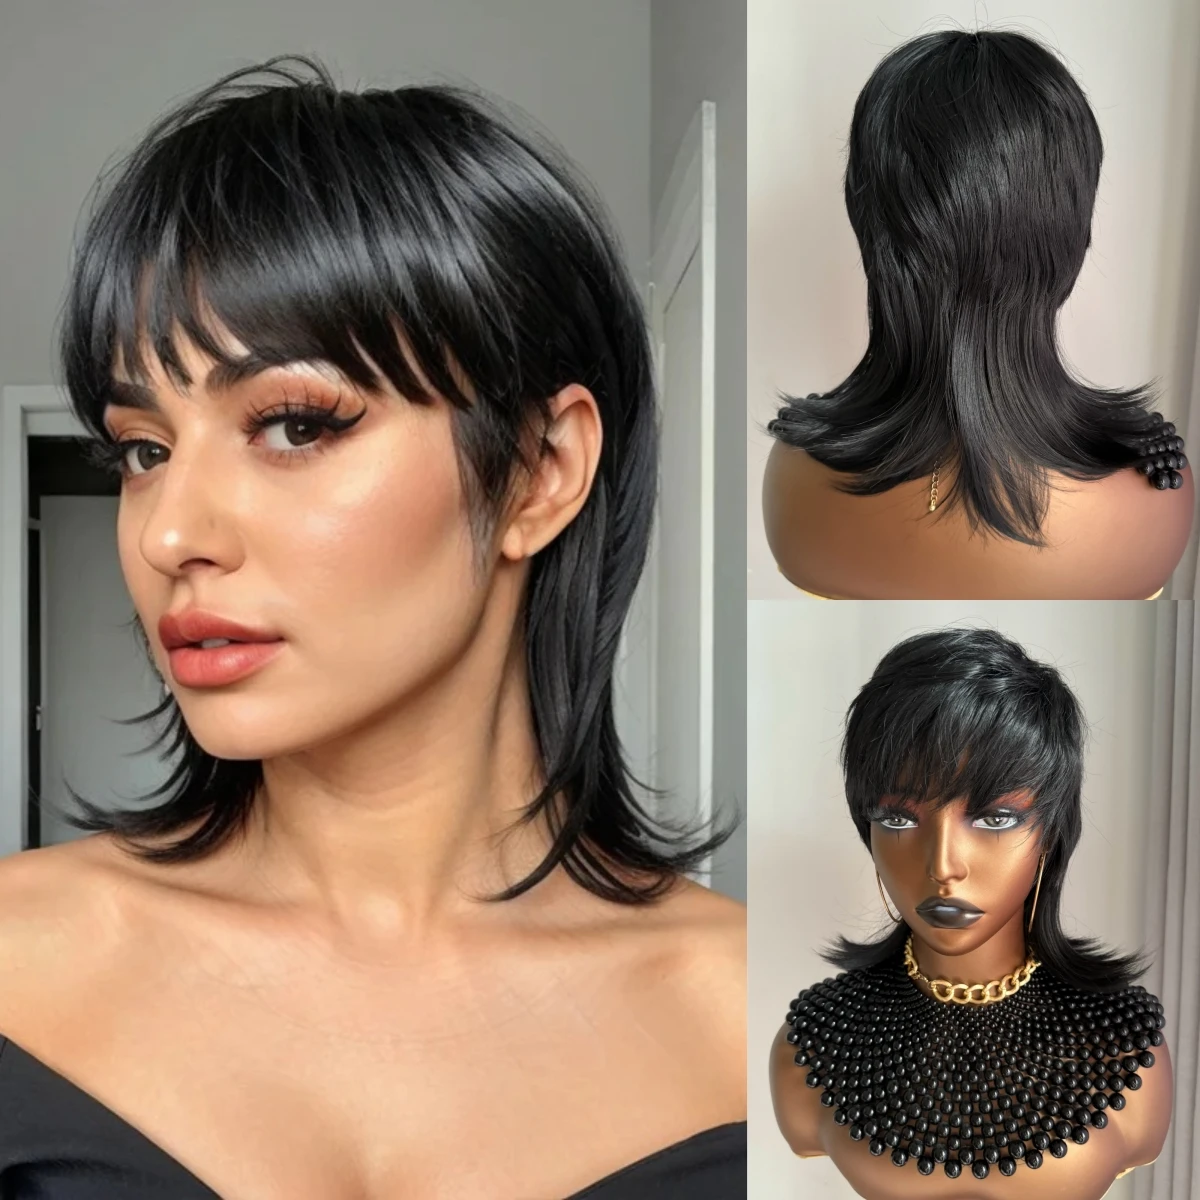 CUZ of HAIR Black Synthetic Short Straight Bob Pixie Cut Wigs Shaggy Layered 80s Mullet Wigs With Bangs For Black Women Daily